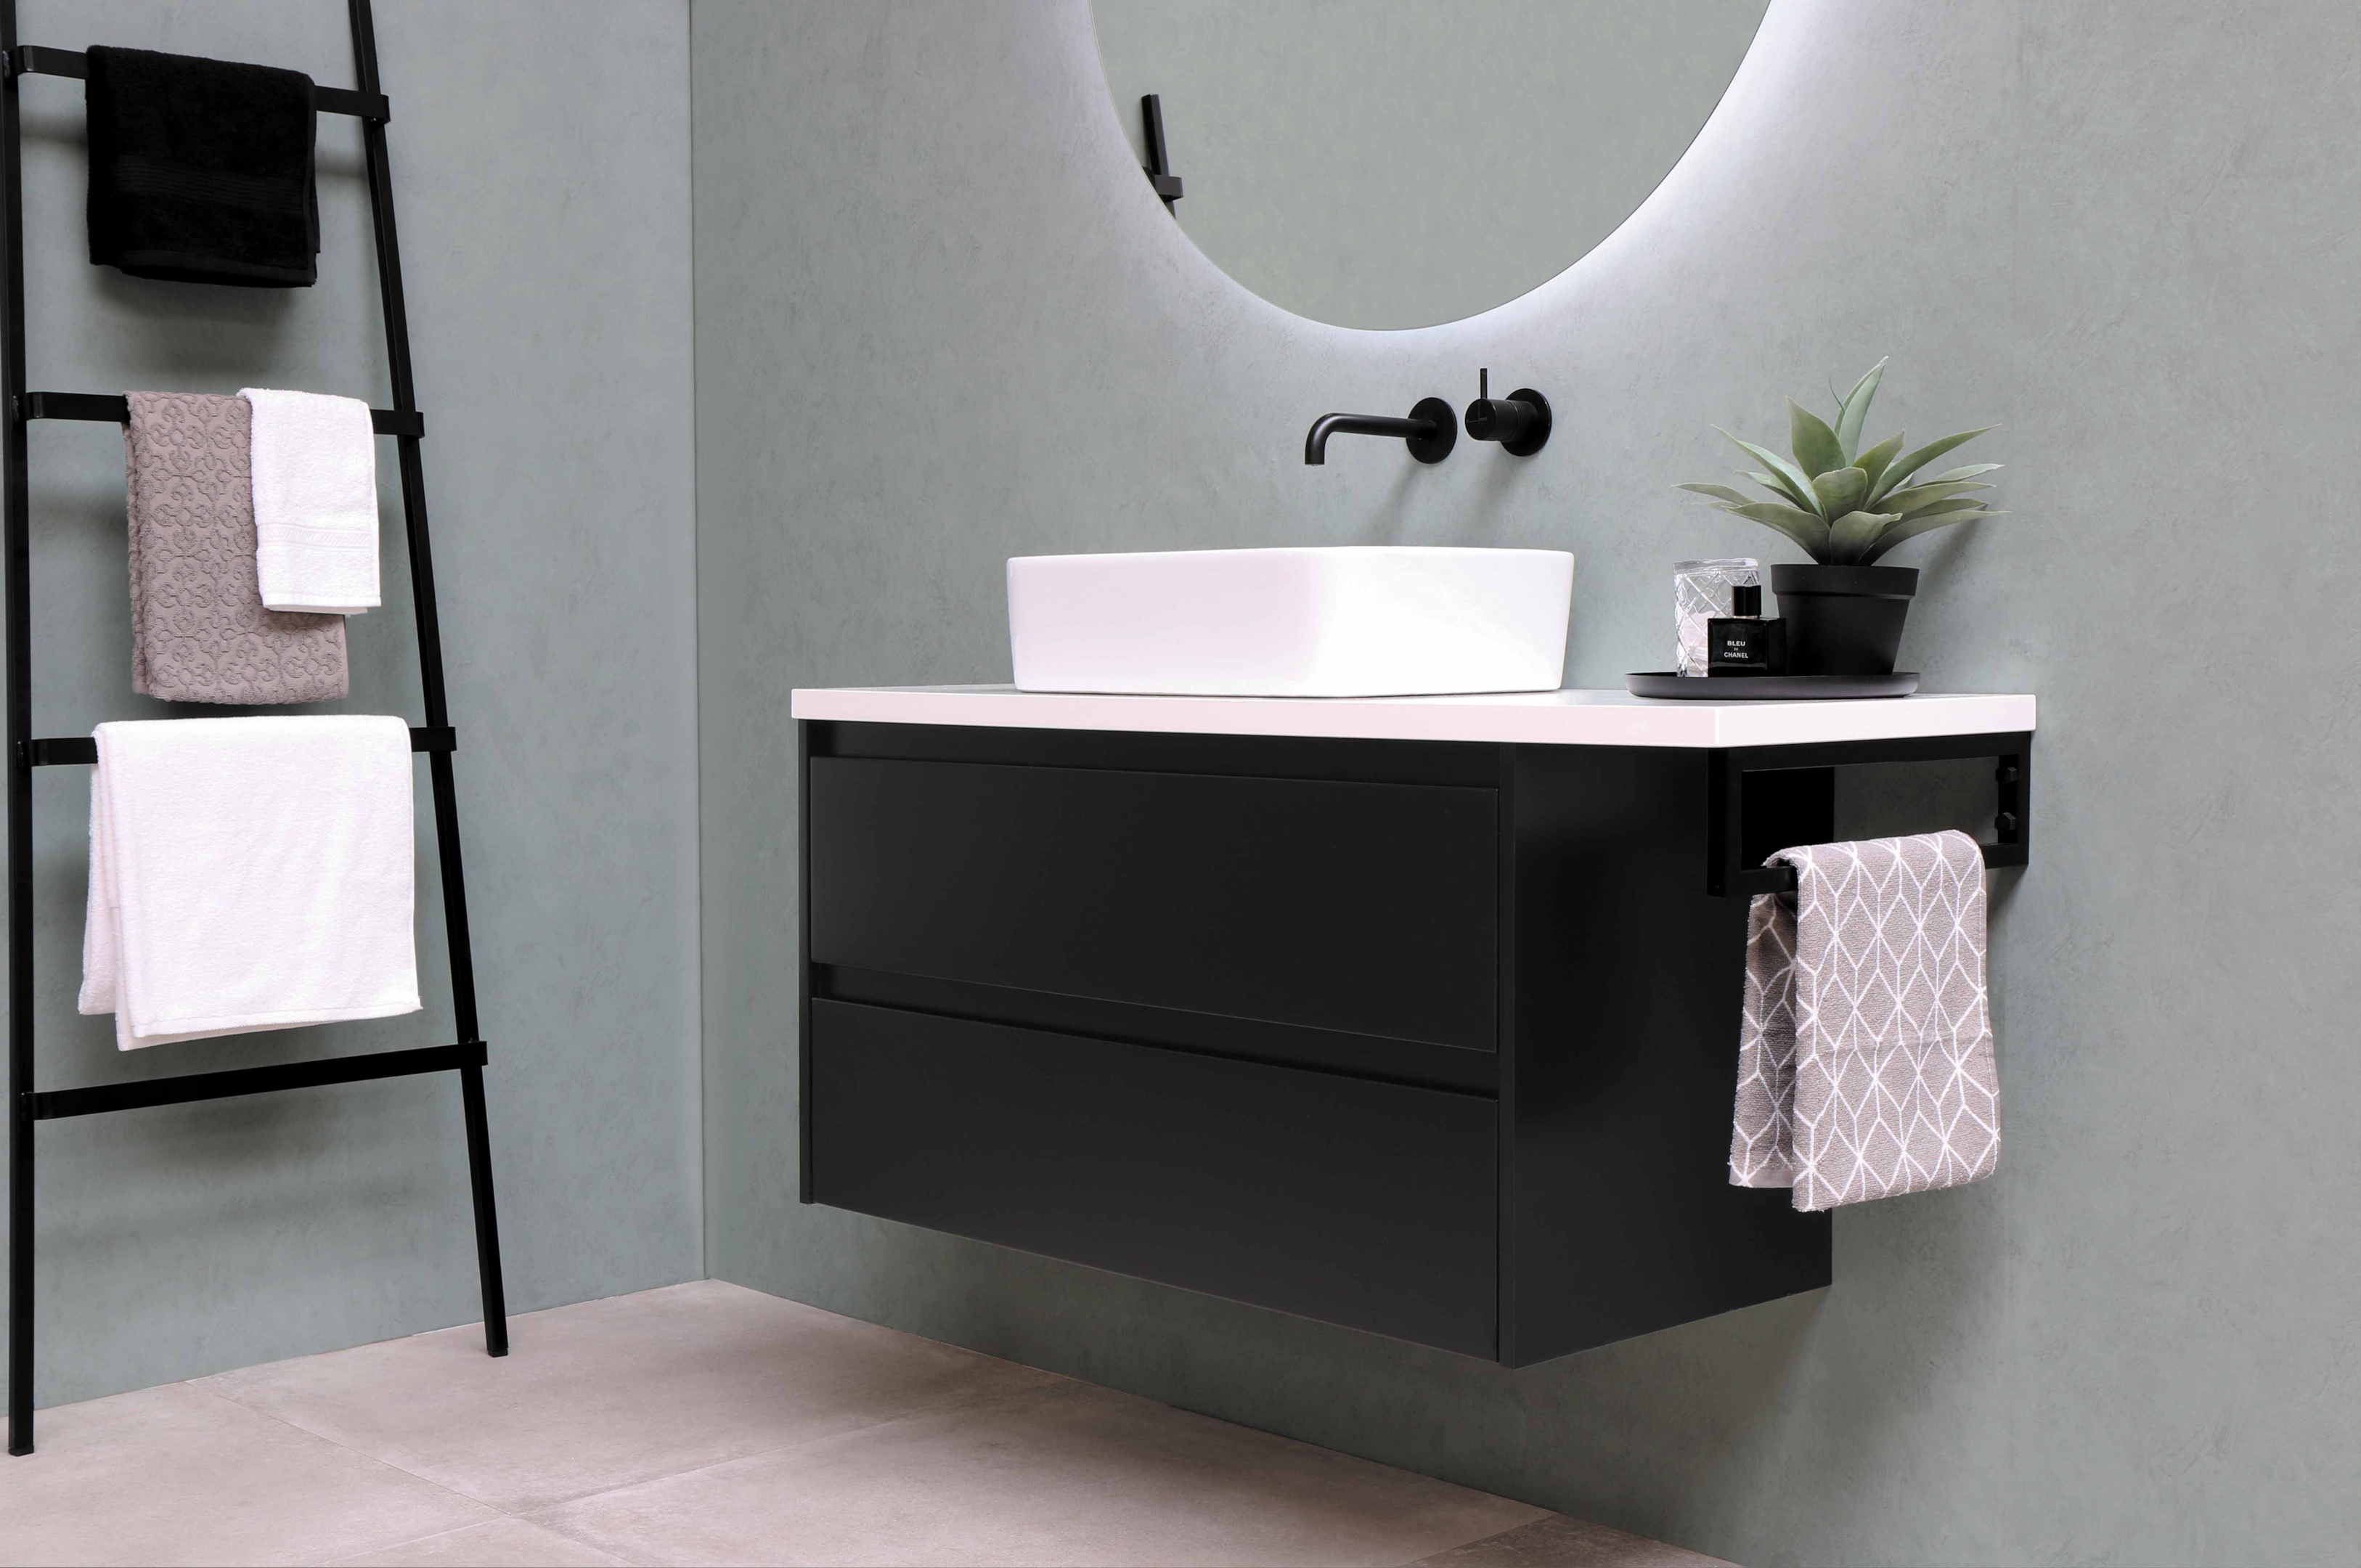 Black is best used in a bathroom's interior design.